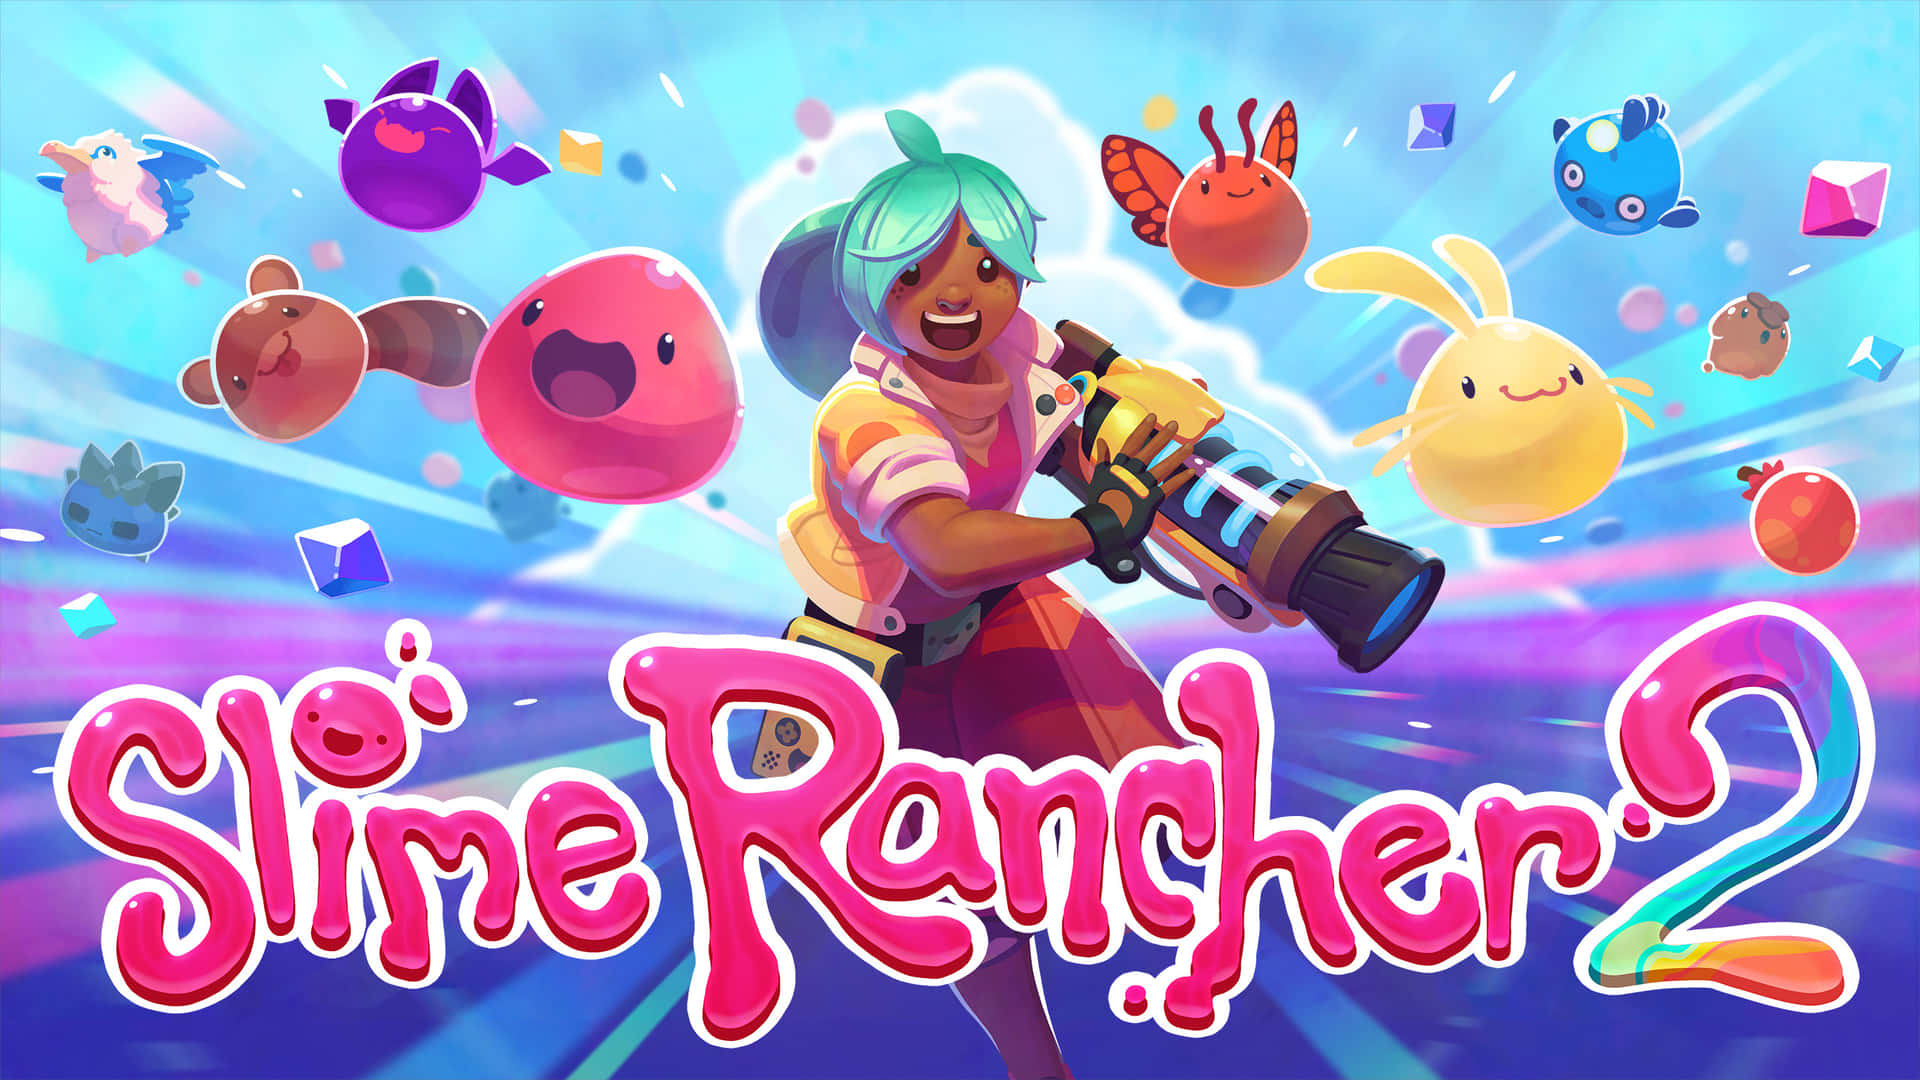 Explore and build your own farm in Slime Rancher Wallpaper